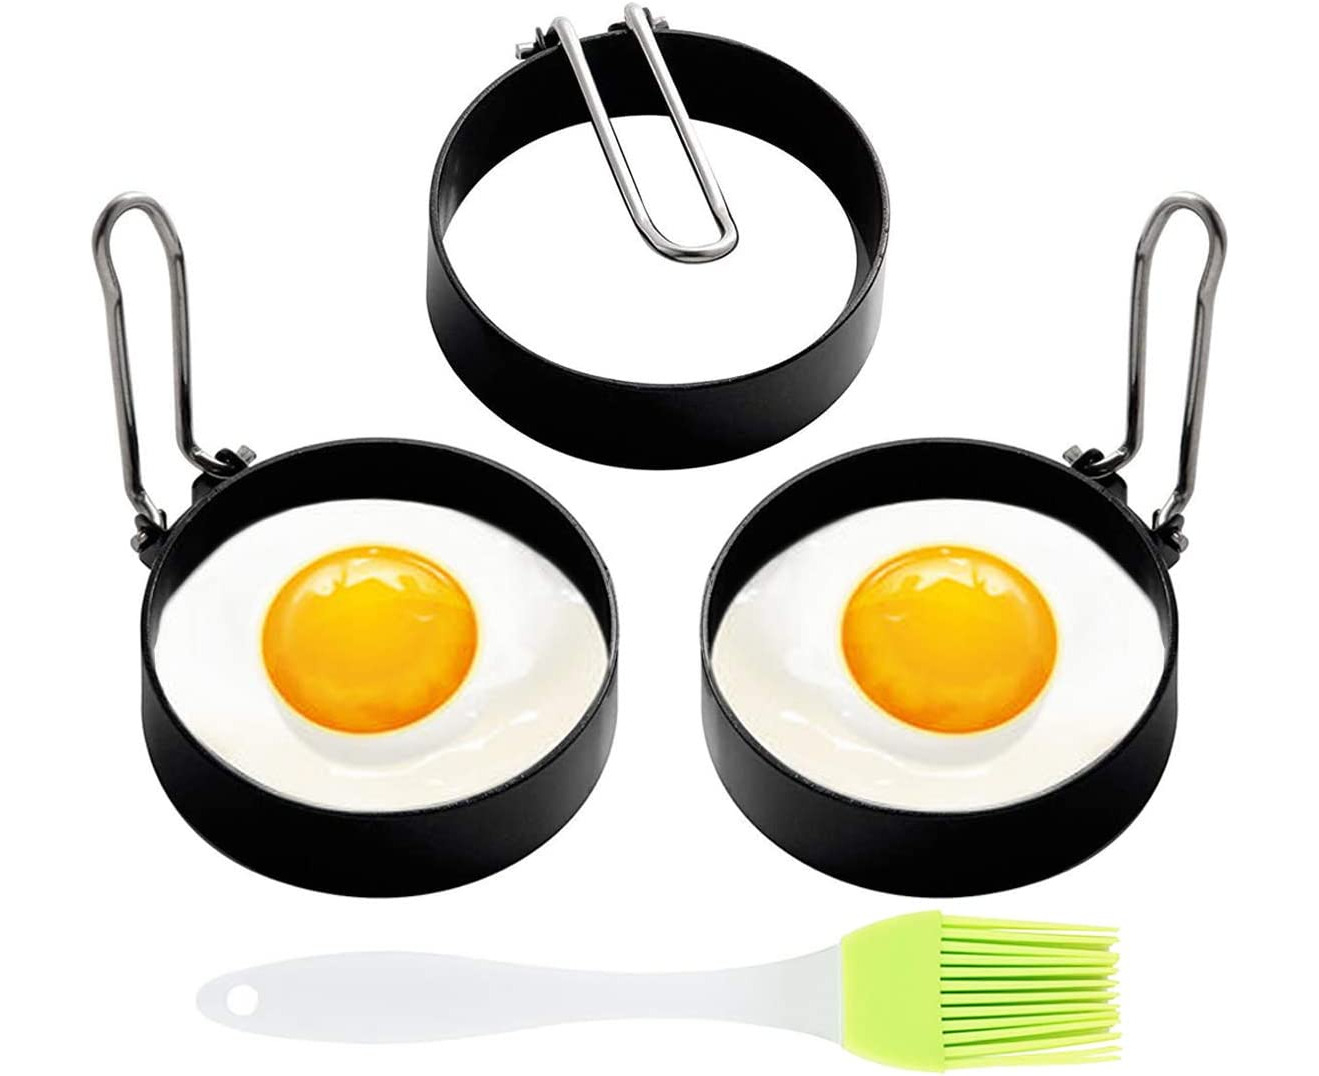 Round Egg Ring Set Black Stainless Steel Pancake Mold 2 Pack Egg Ring Reusable Kitchen Cooking Tools for Frying or Shaping Eggs/Sandwiches/Breakfast 